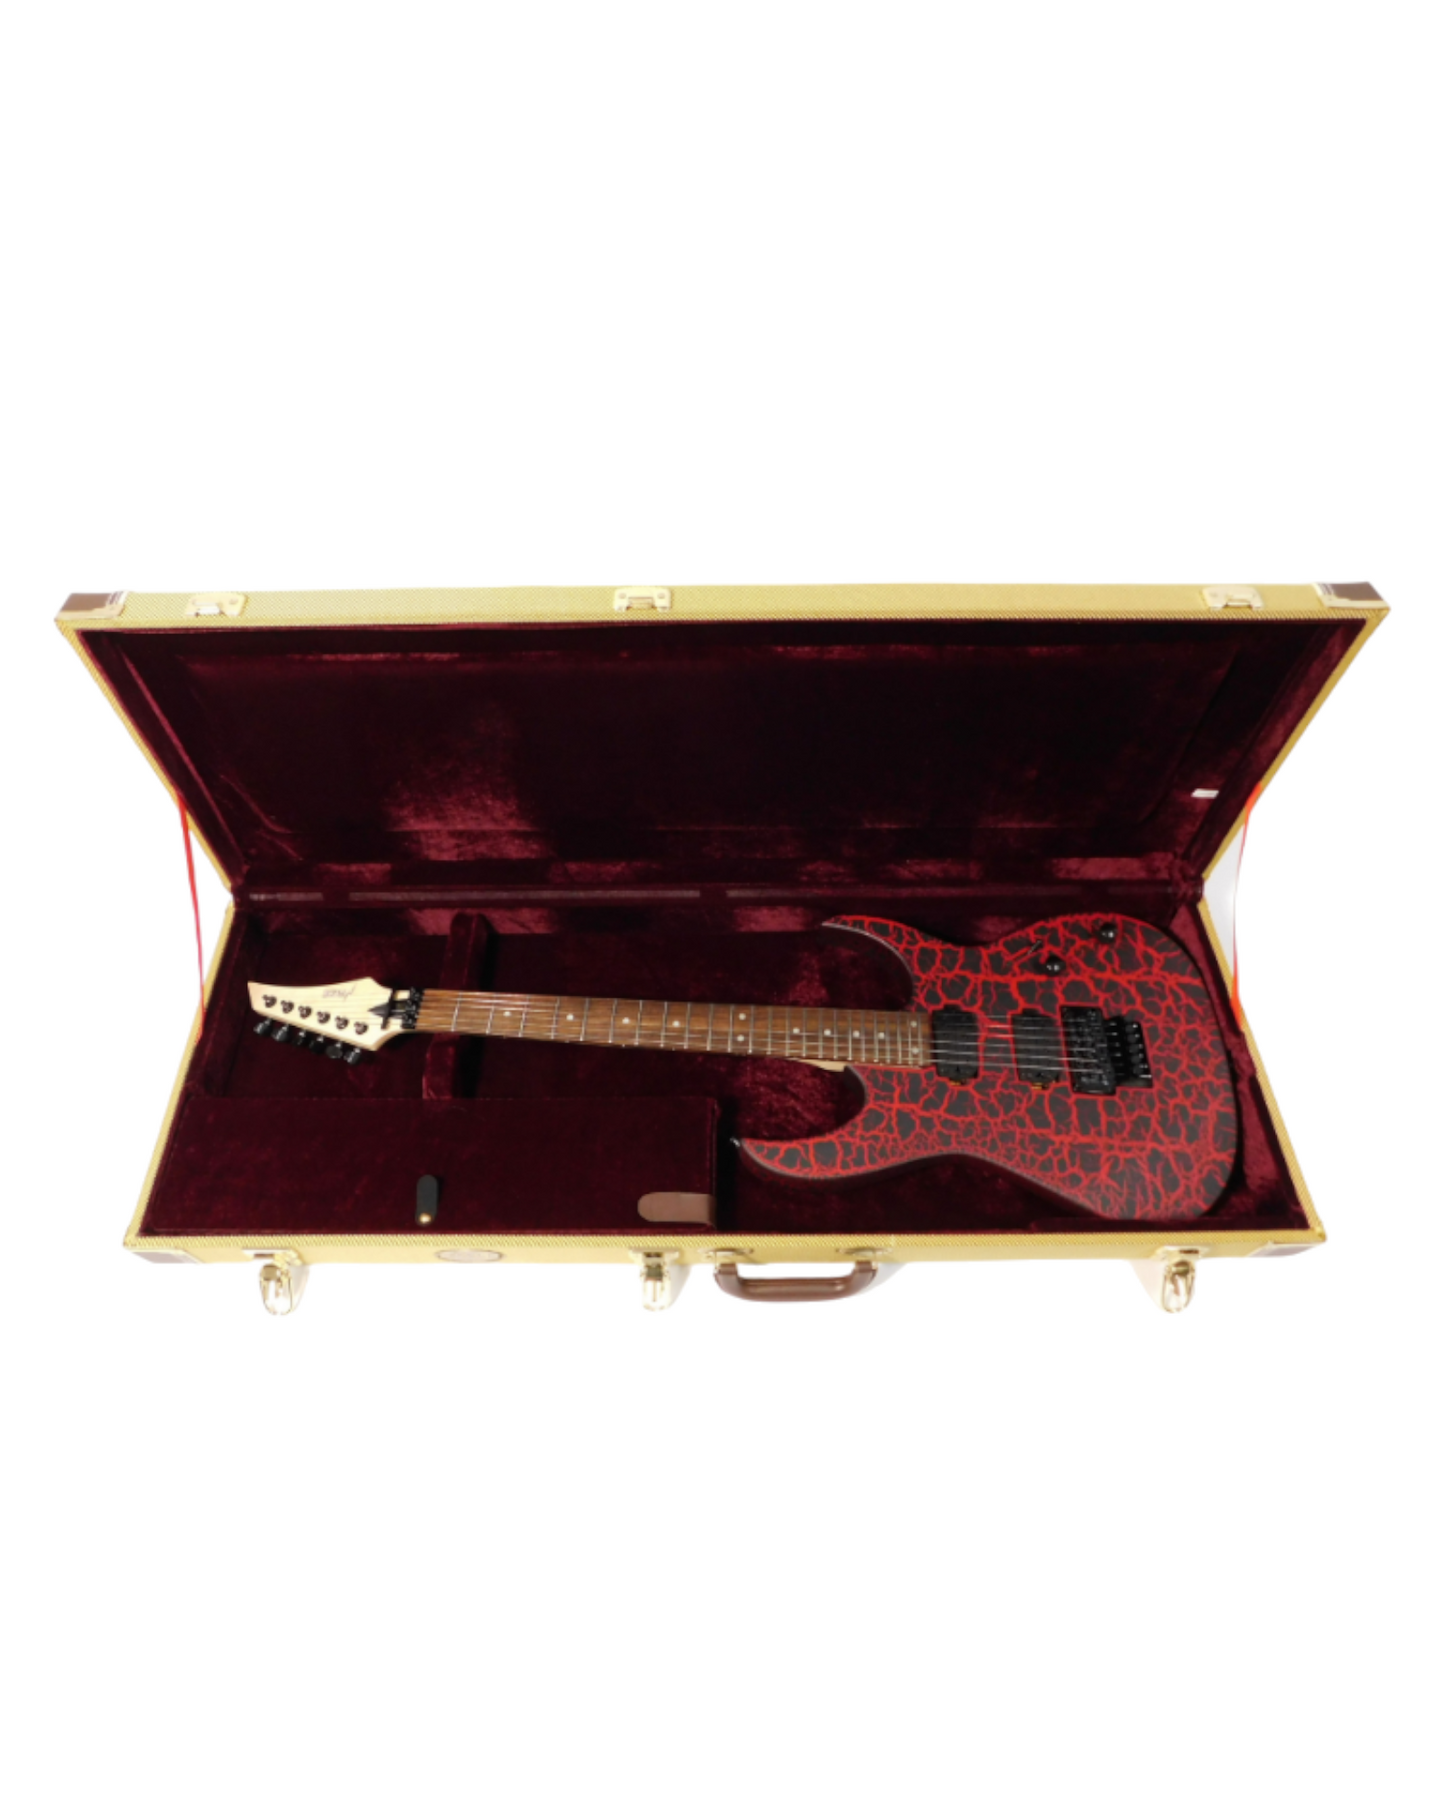 Haze HPAG19040STBY Electric Guitar Hard Case